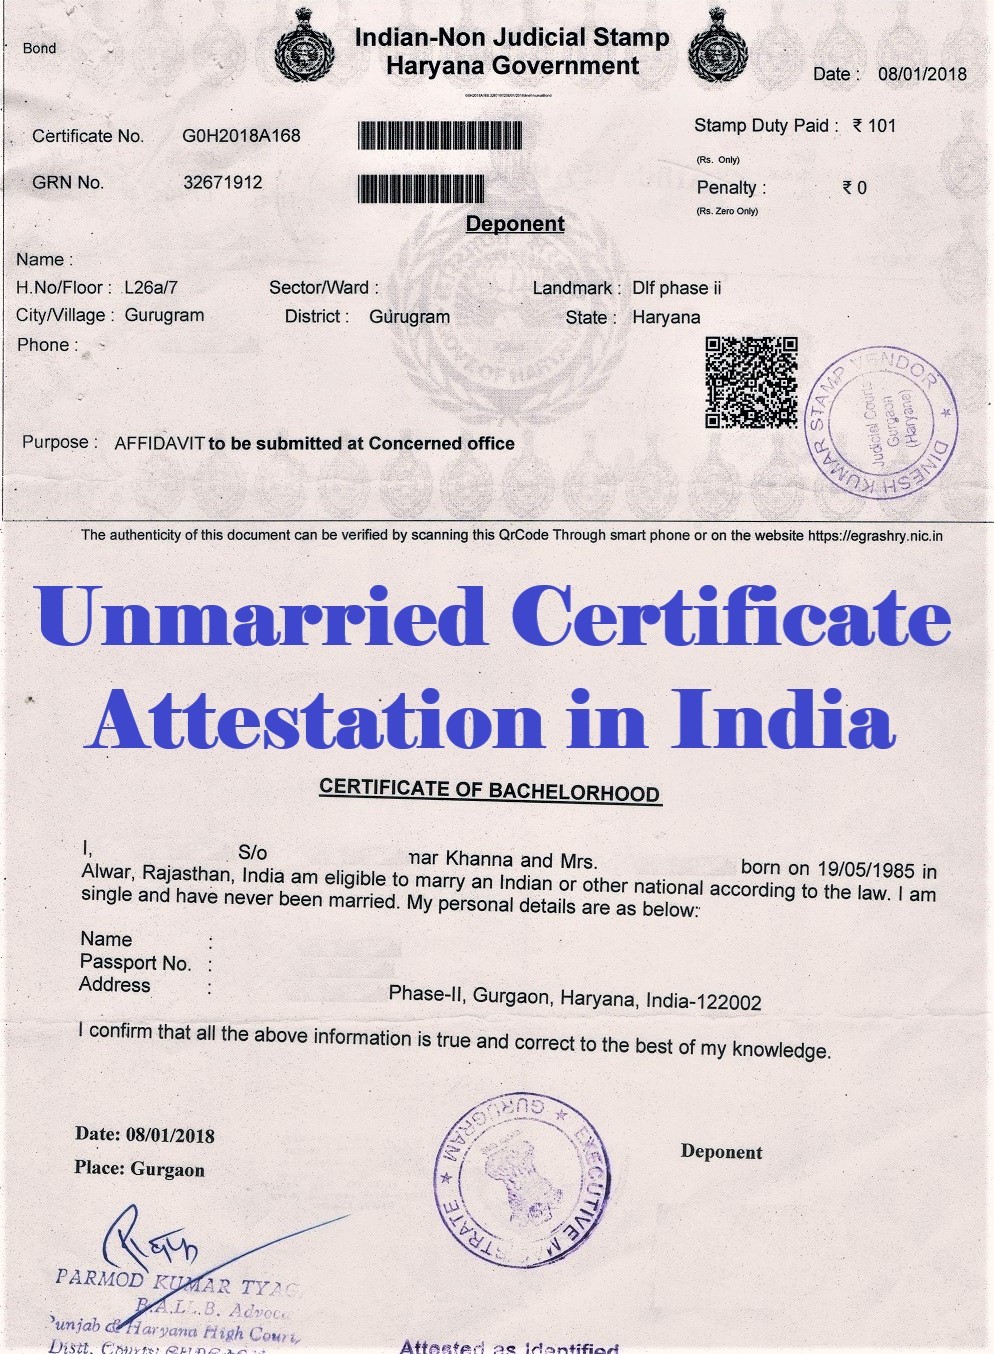 Unmarried Certificate Attestation from Nigeria Embassy